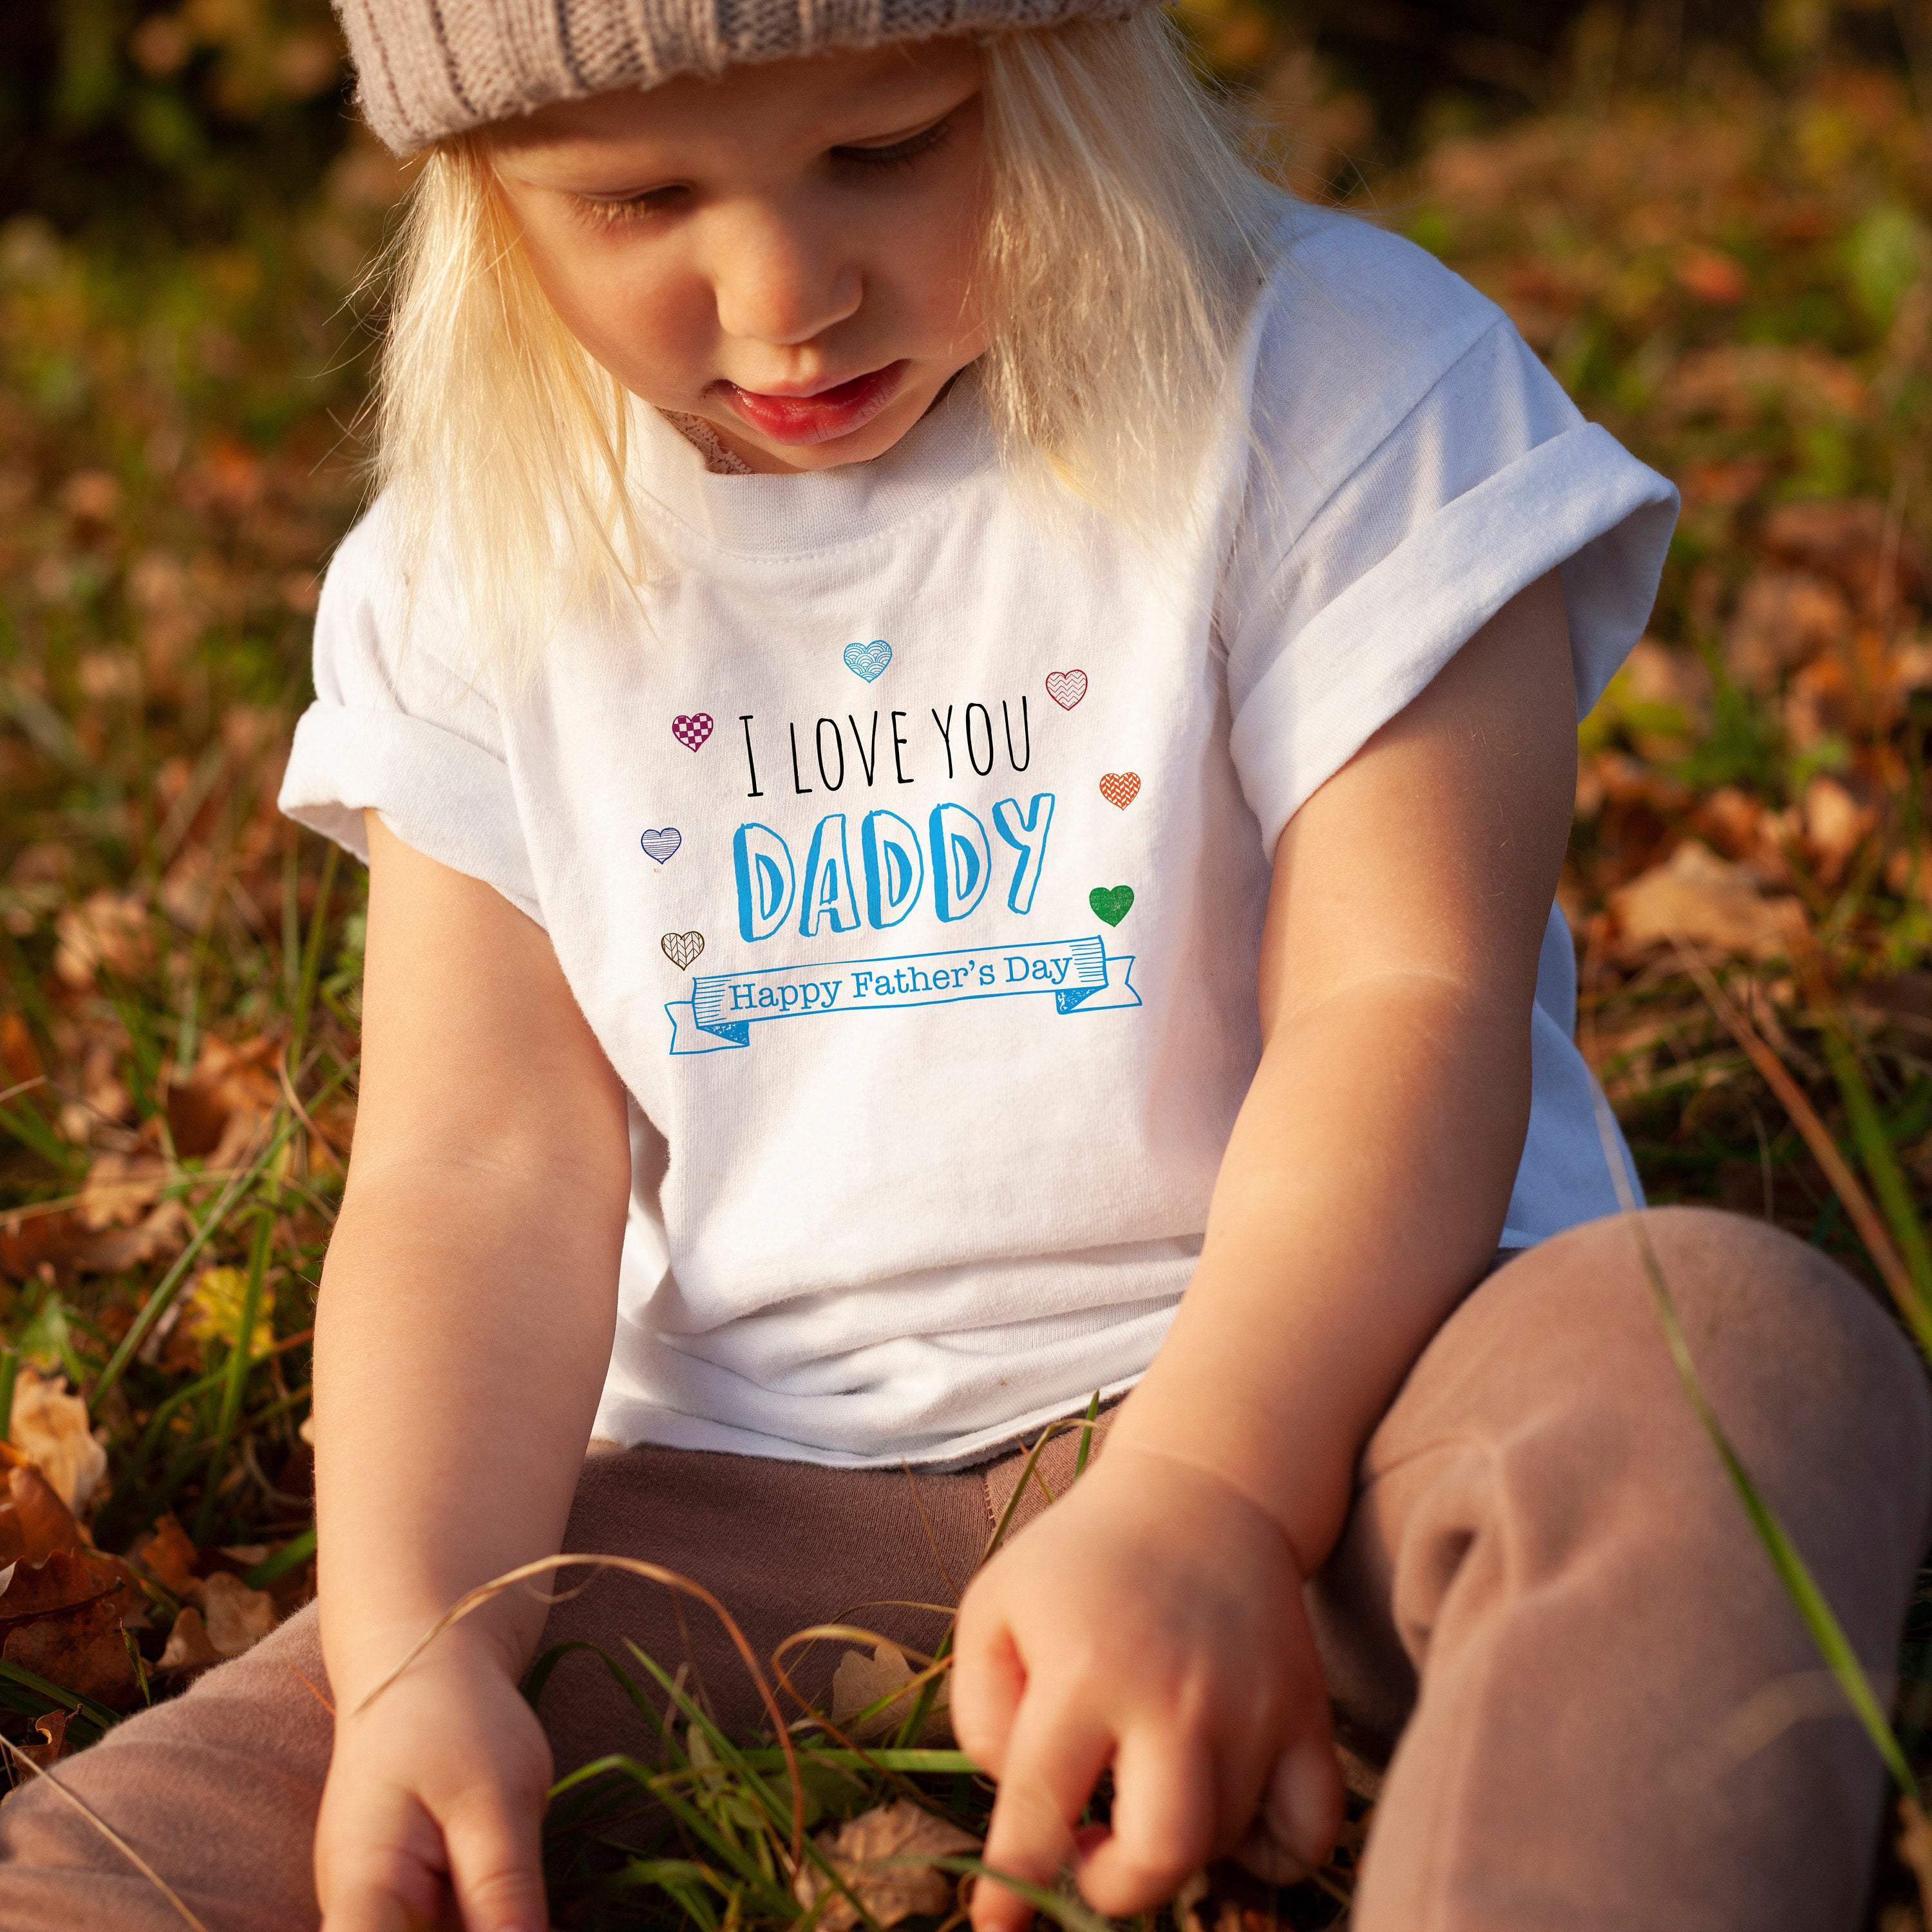 I Love you daddy Happy Father's Day tshirt, First fathers day gift, Kids tshirt for dad